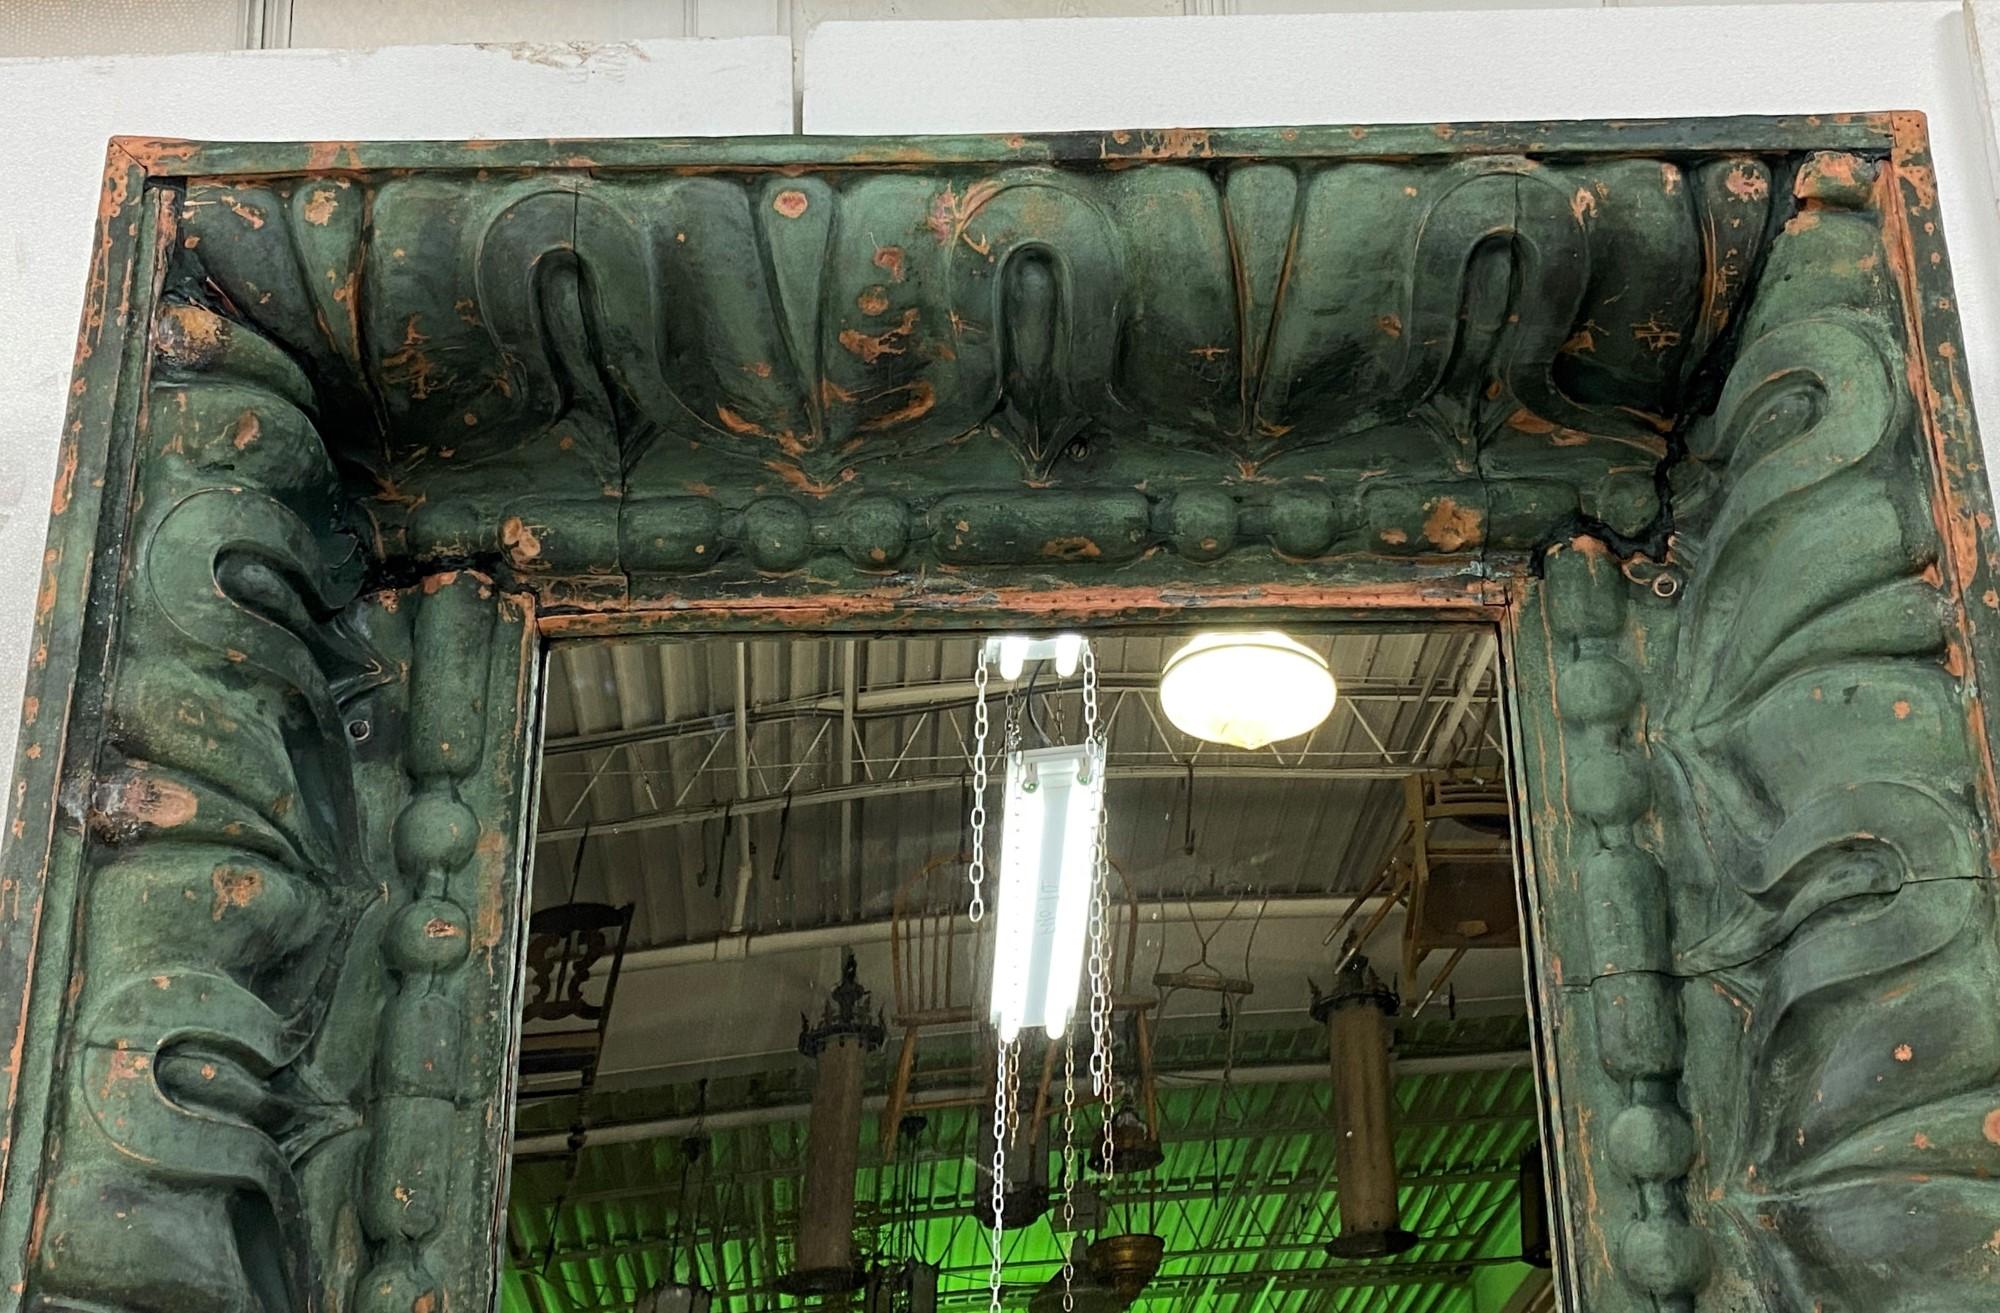 American Copper Cornice Mirror with Original Verdigris Patina from NYC Building